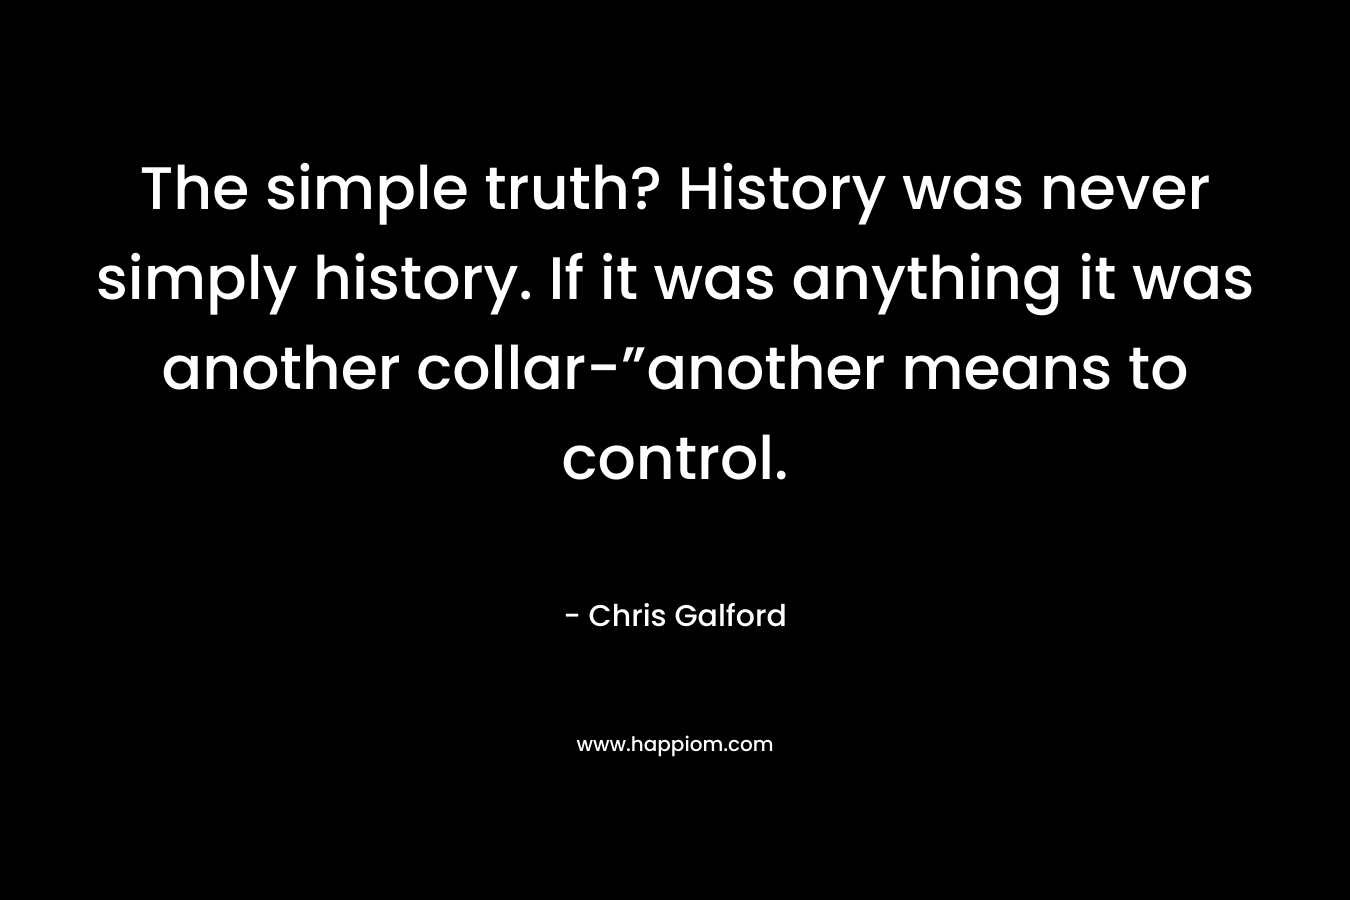 The simple truth? History was never simply history. If it was anything it was another collar-”another means to control.